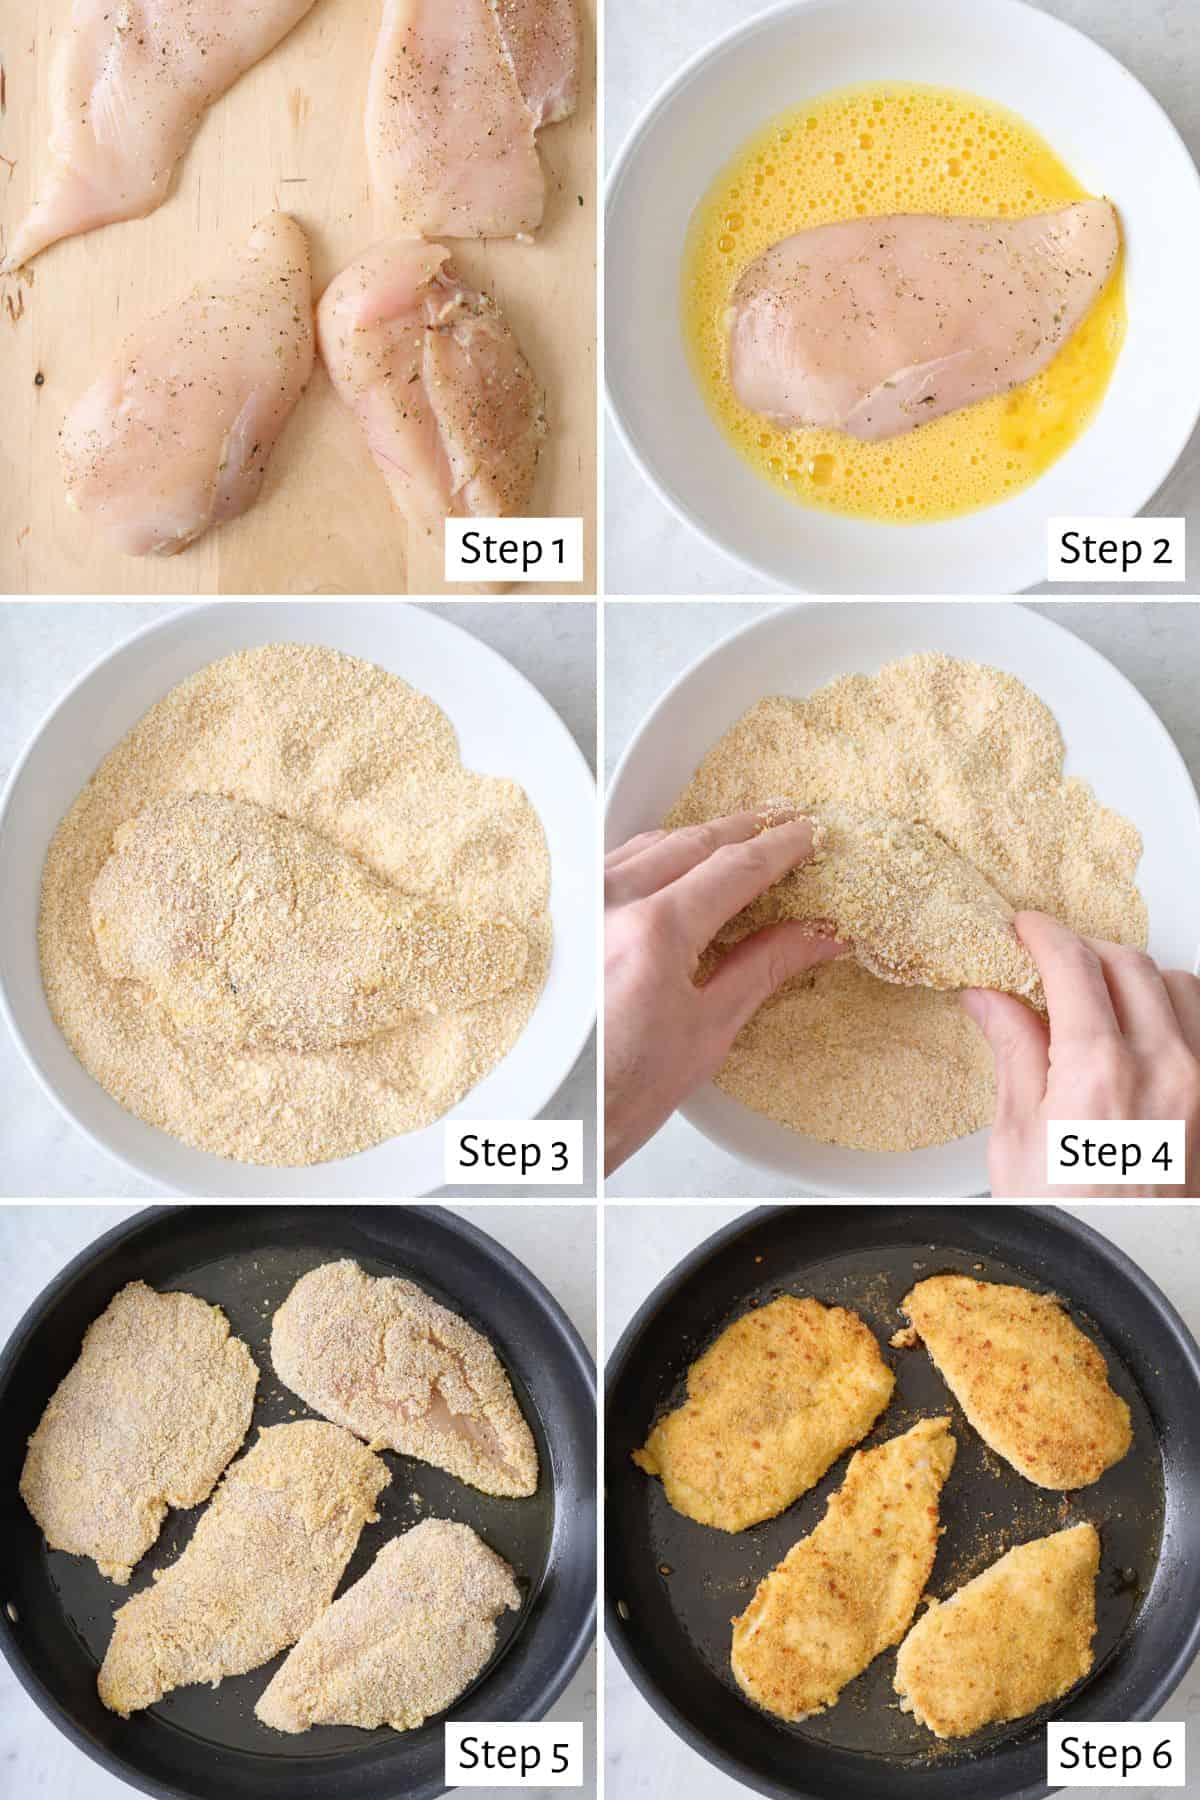 6-image collage preparing the chicken: 1 - Seasoned chicken on a cutting board; 2 - One chicken cutlet dipped in a shallow bowl with egg; 3 - Egg-coated cutlet on top of breadcrumb mixture; 4 - Pressing the chicken into the breadcrumb mixture to fully coat; 5 - Chicken in an oiled skillet before cooking; 6 - After flipping to show golden brown crust.